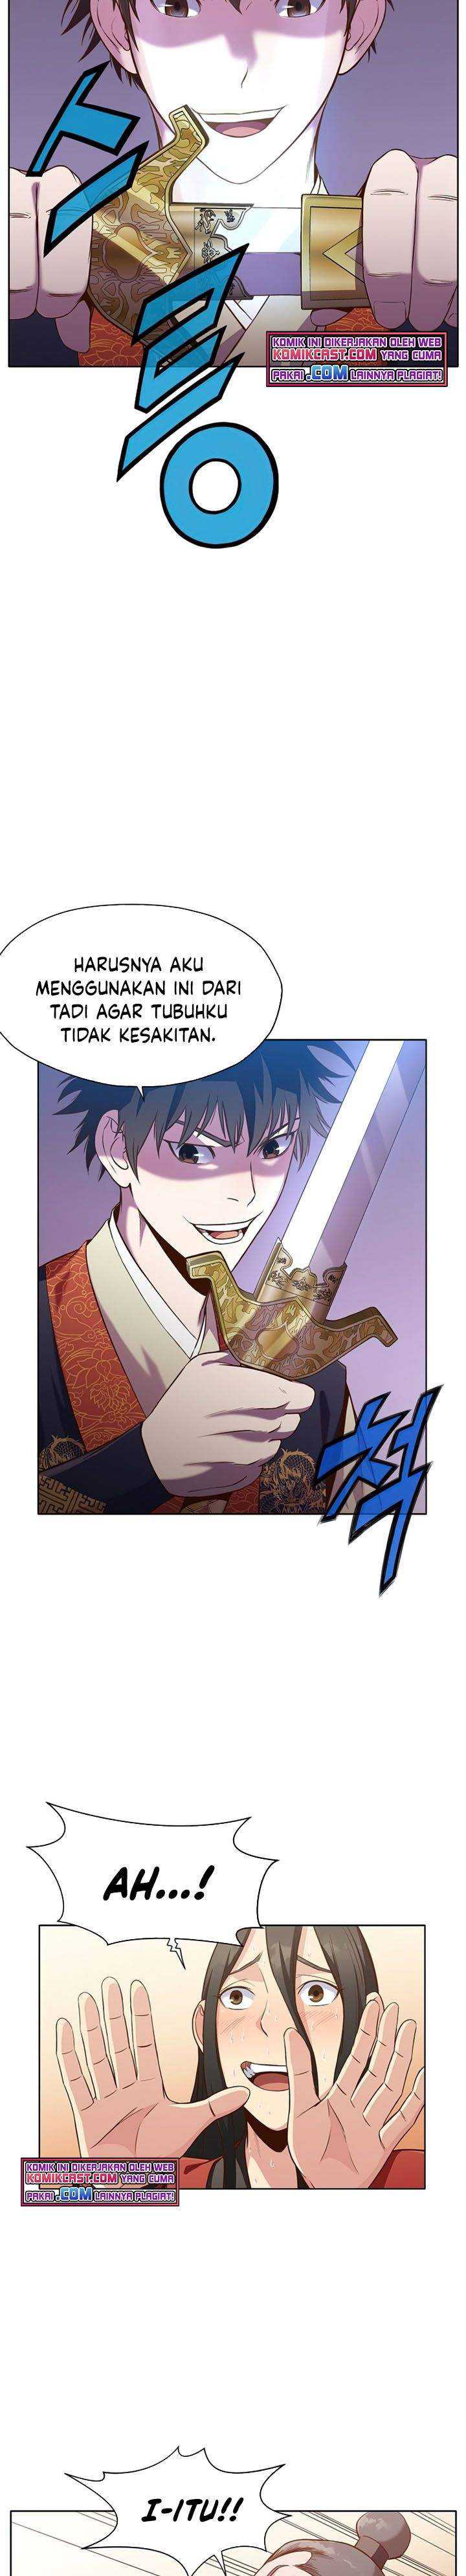 Heavenly Martial God Chapter 14